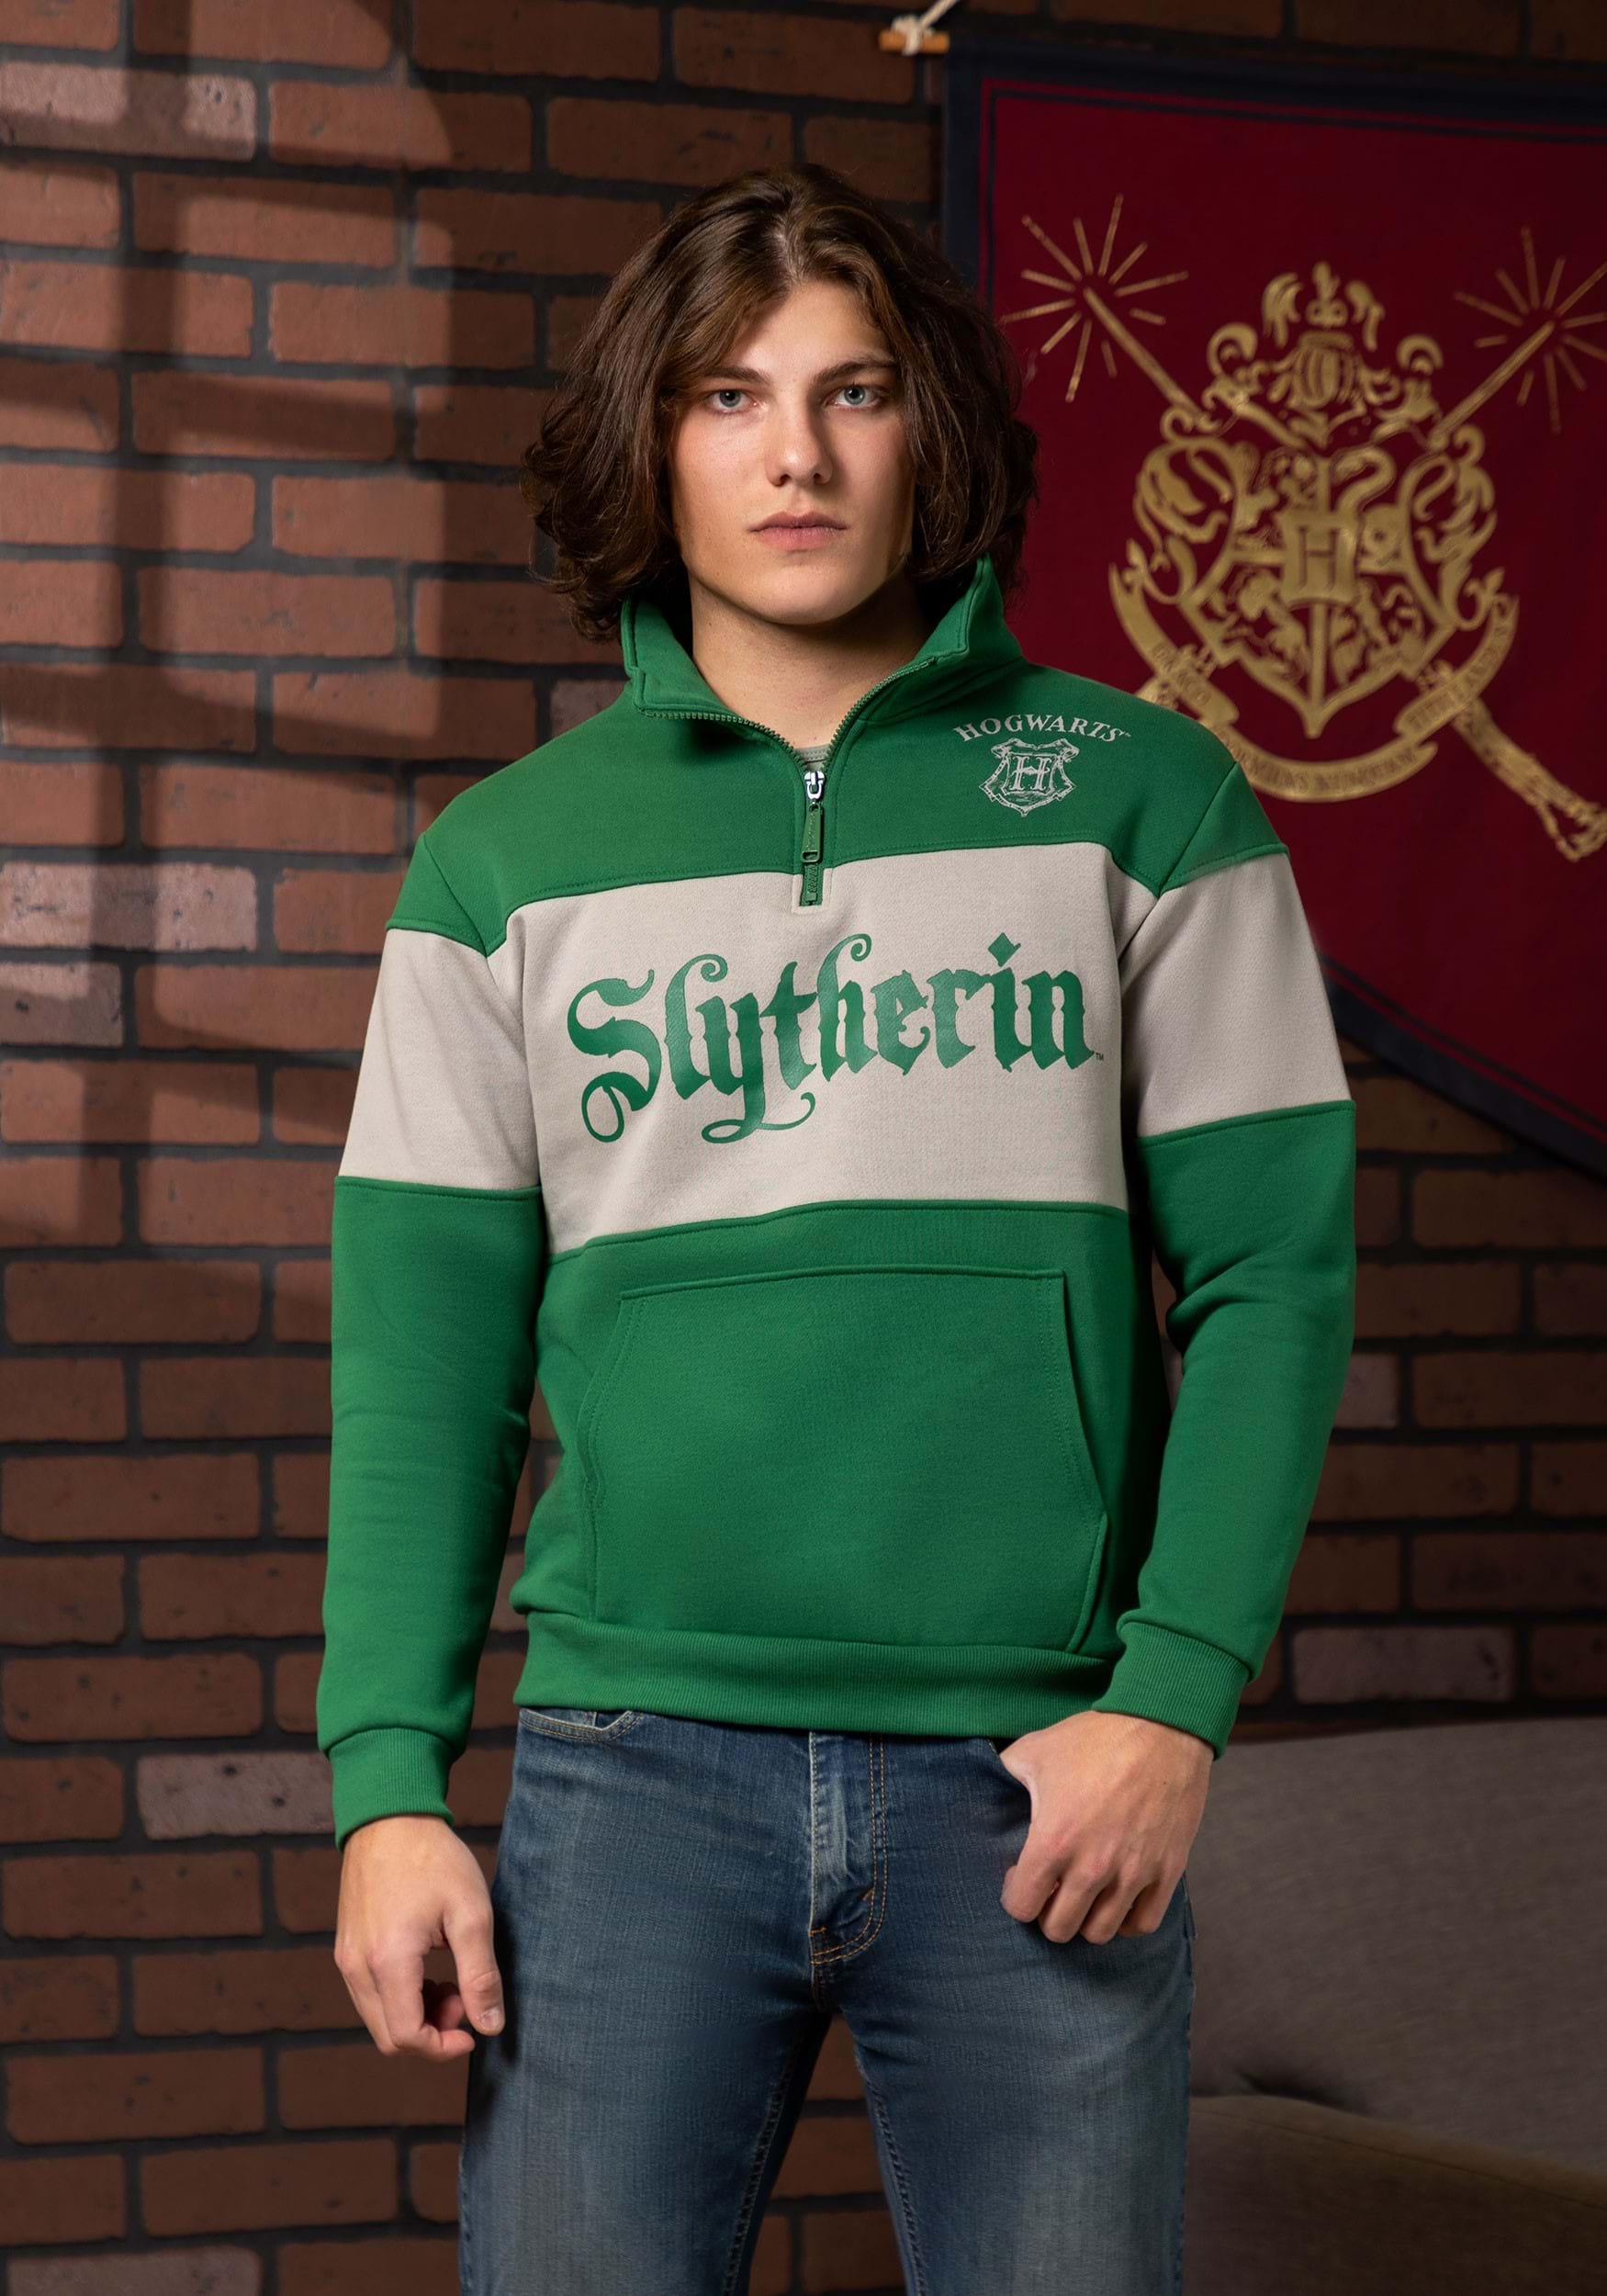 What If Harry Was In Slytherin - FULL STORY 1-4